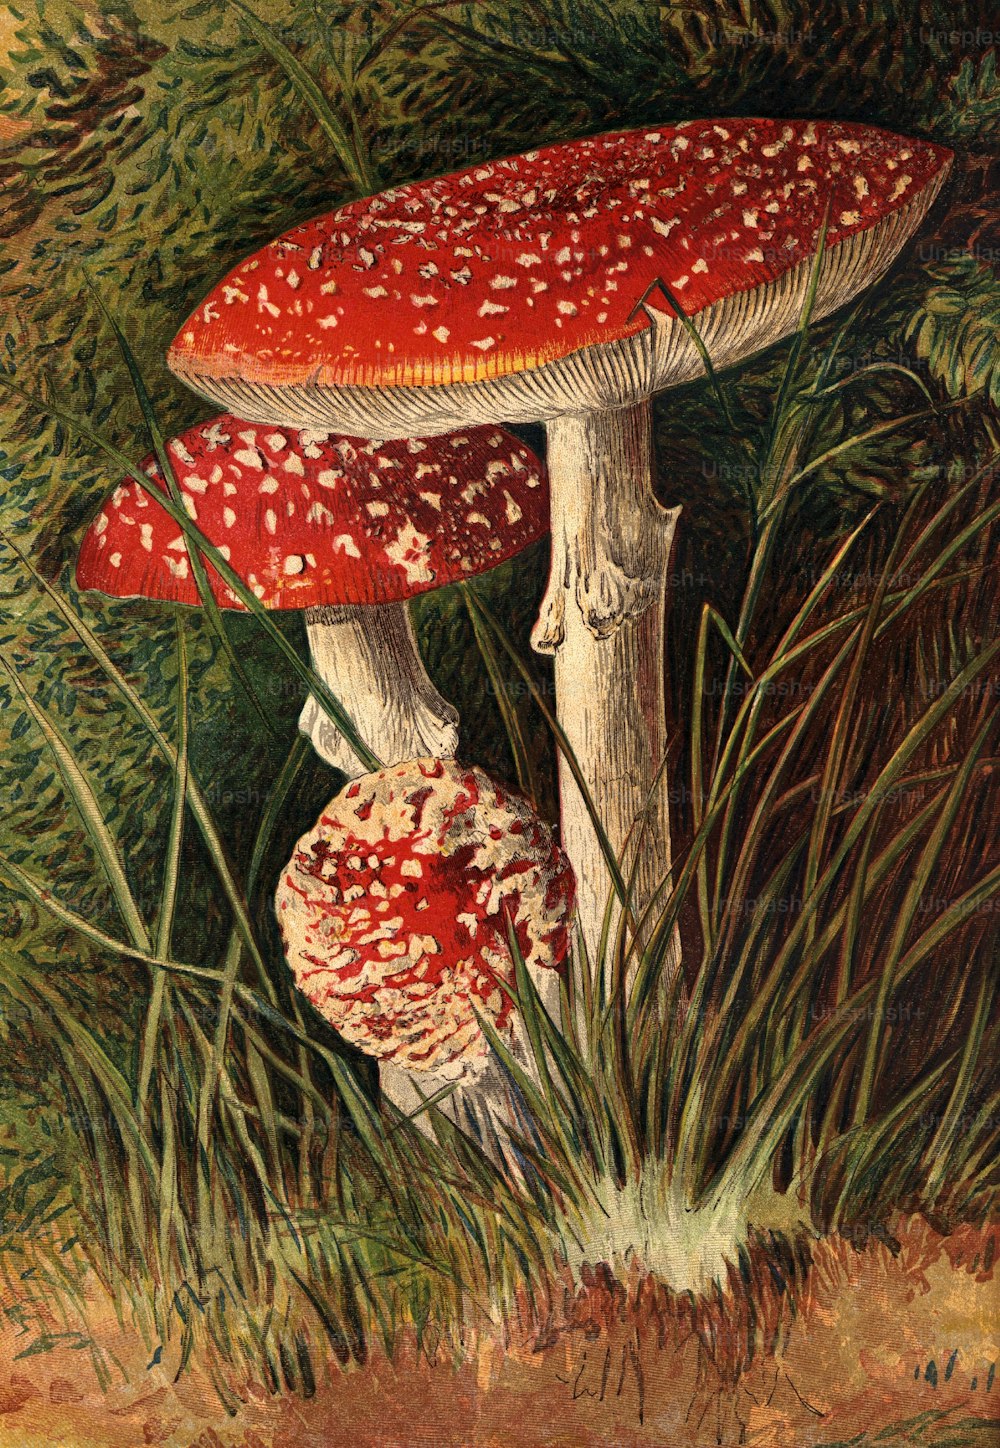 um 1890: Der giftige Pilz Agaricus muscaricus.  Leighton Brothers (Foto von Hulton Archive / Getty Images)